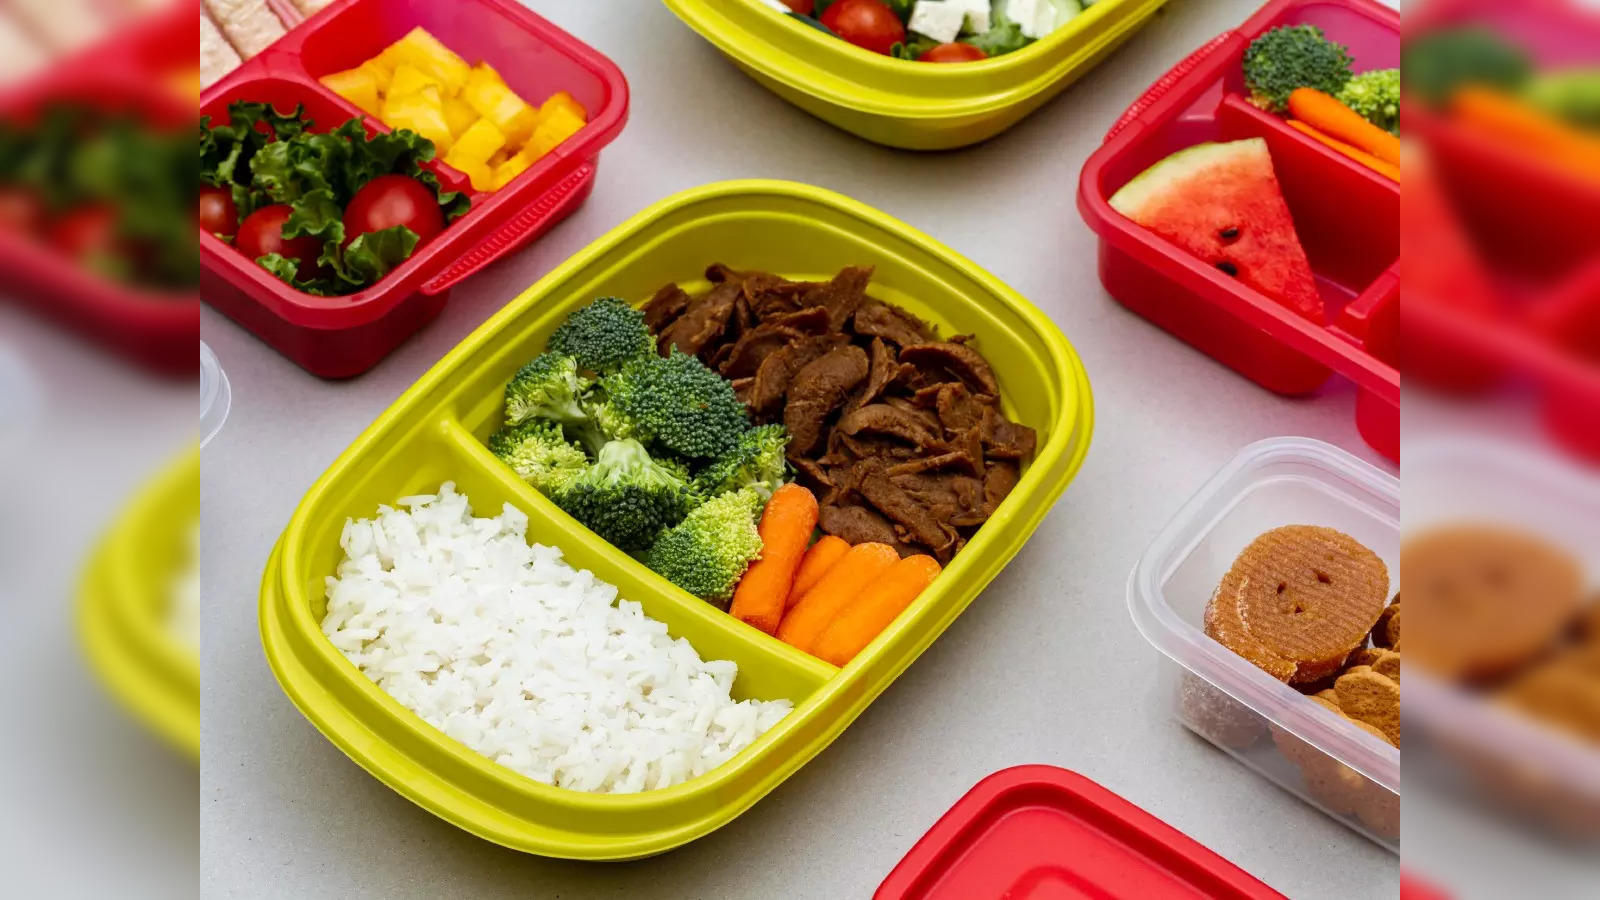 Find the Best Lunch Box to Keep Food Warm - Healthy Kids Recipes